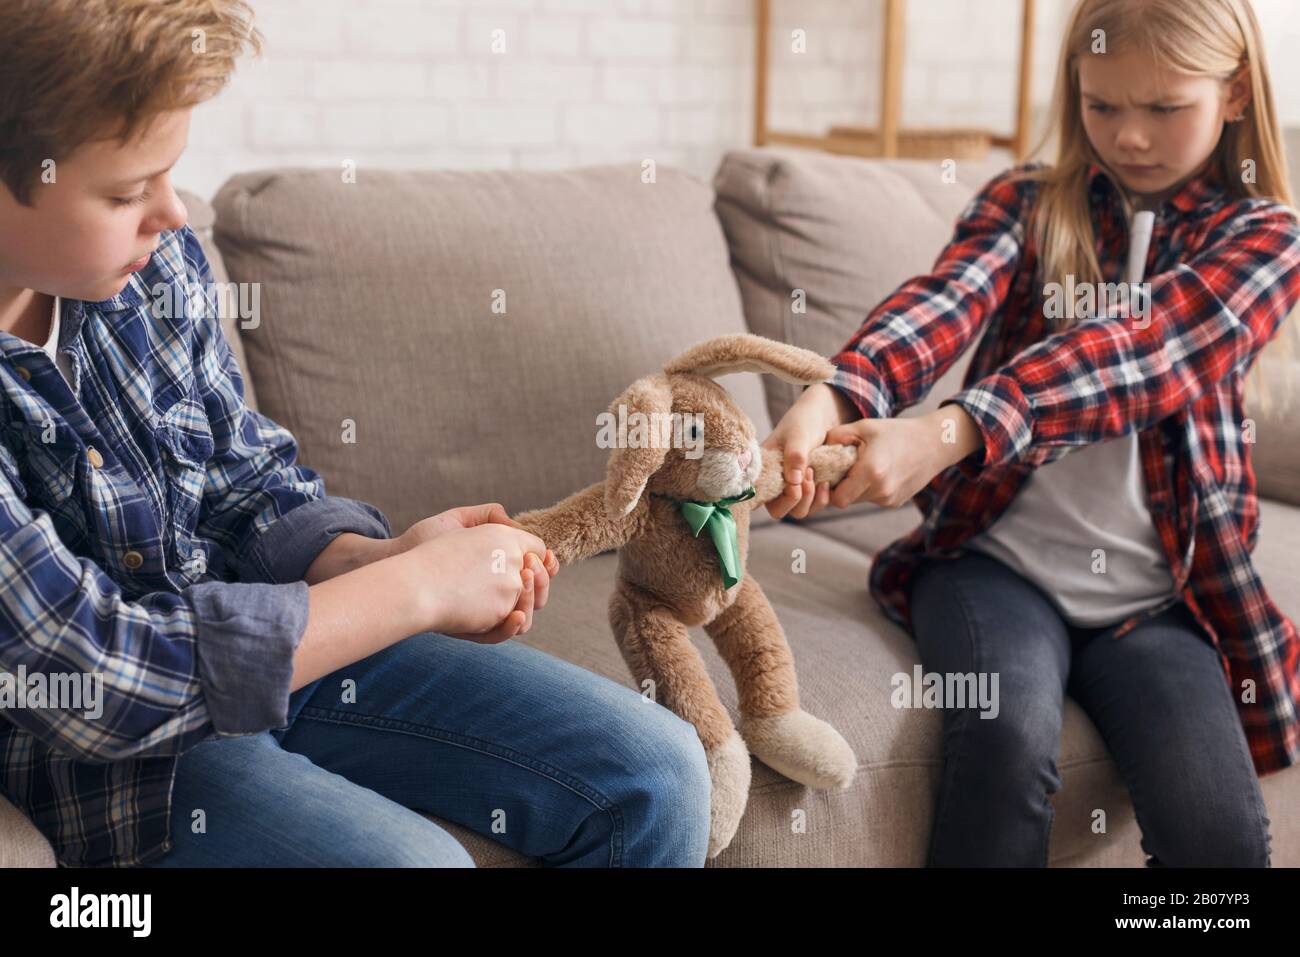 Boy And Girl Not Wanting To Share A Toy Indoor Stock Photo